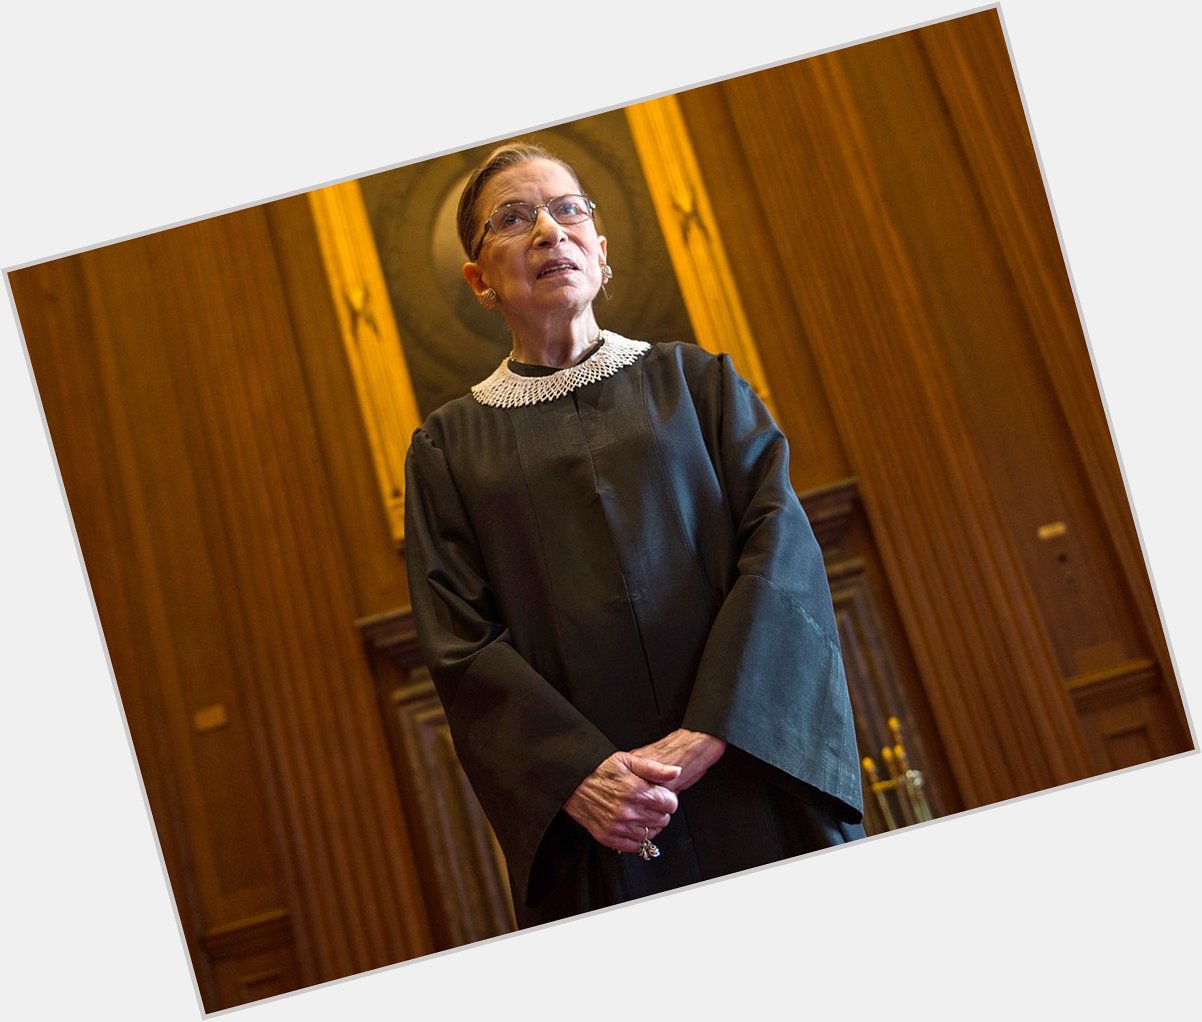 Happy Birthday to Ruth Bader Ginsburg, Associate Justice of the Supreme Court of the United States 